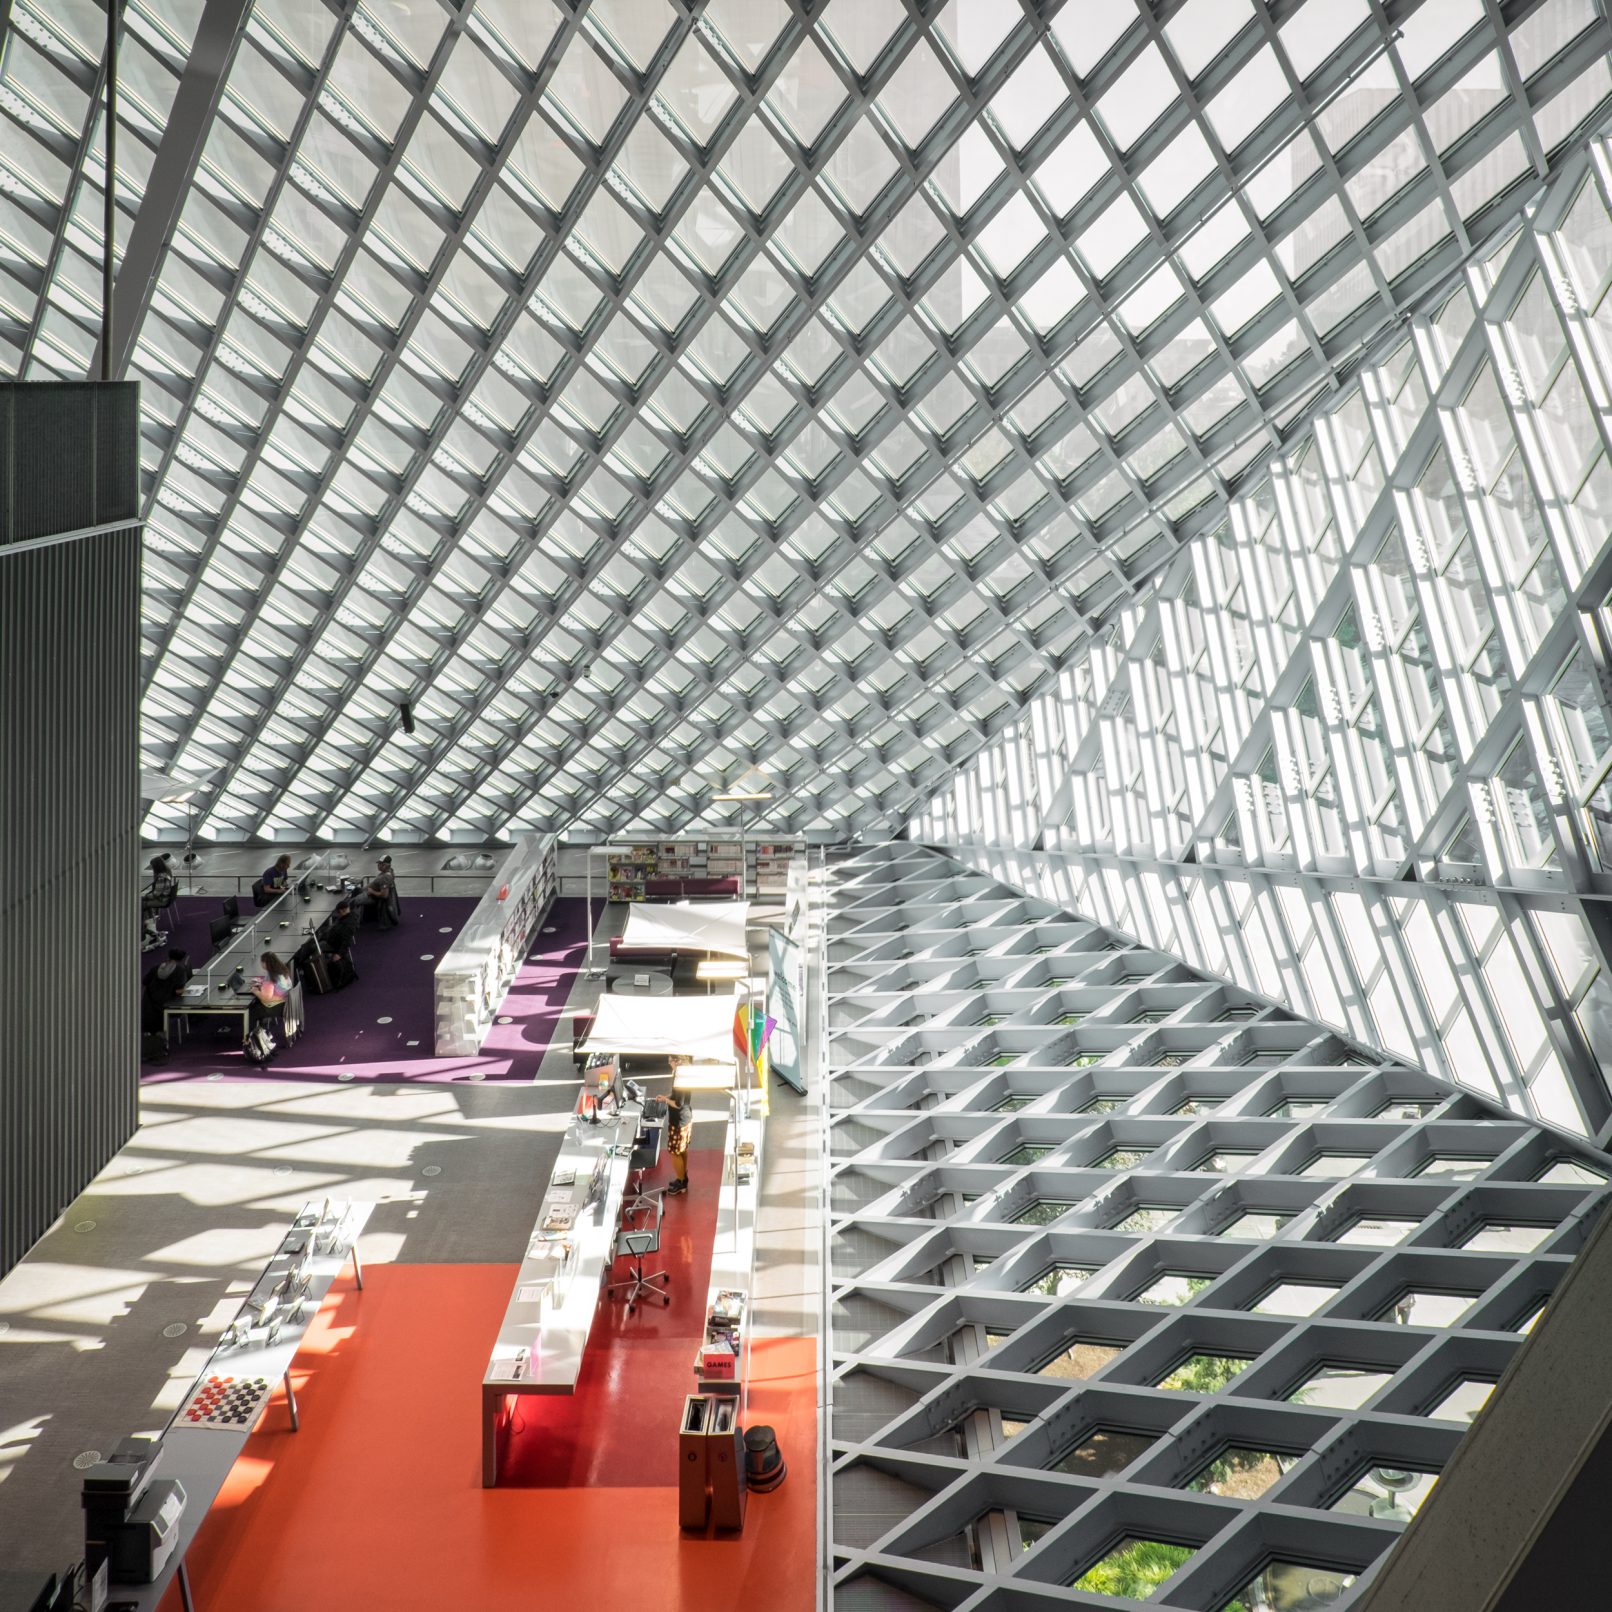 Architectural photography of the Seattle Central Library designed by OMA featuring a one point perspective of the interior looking down at the reference desk on the main floor